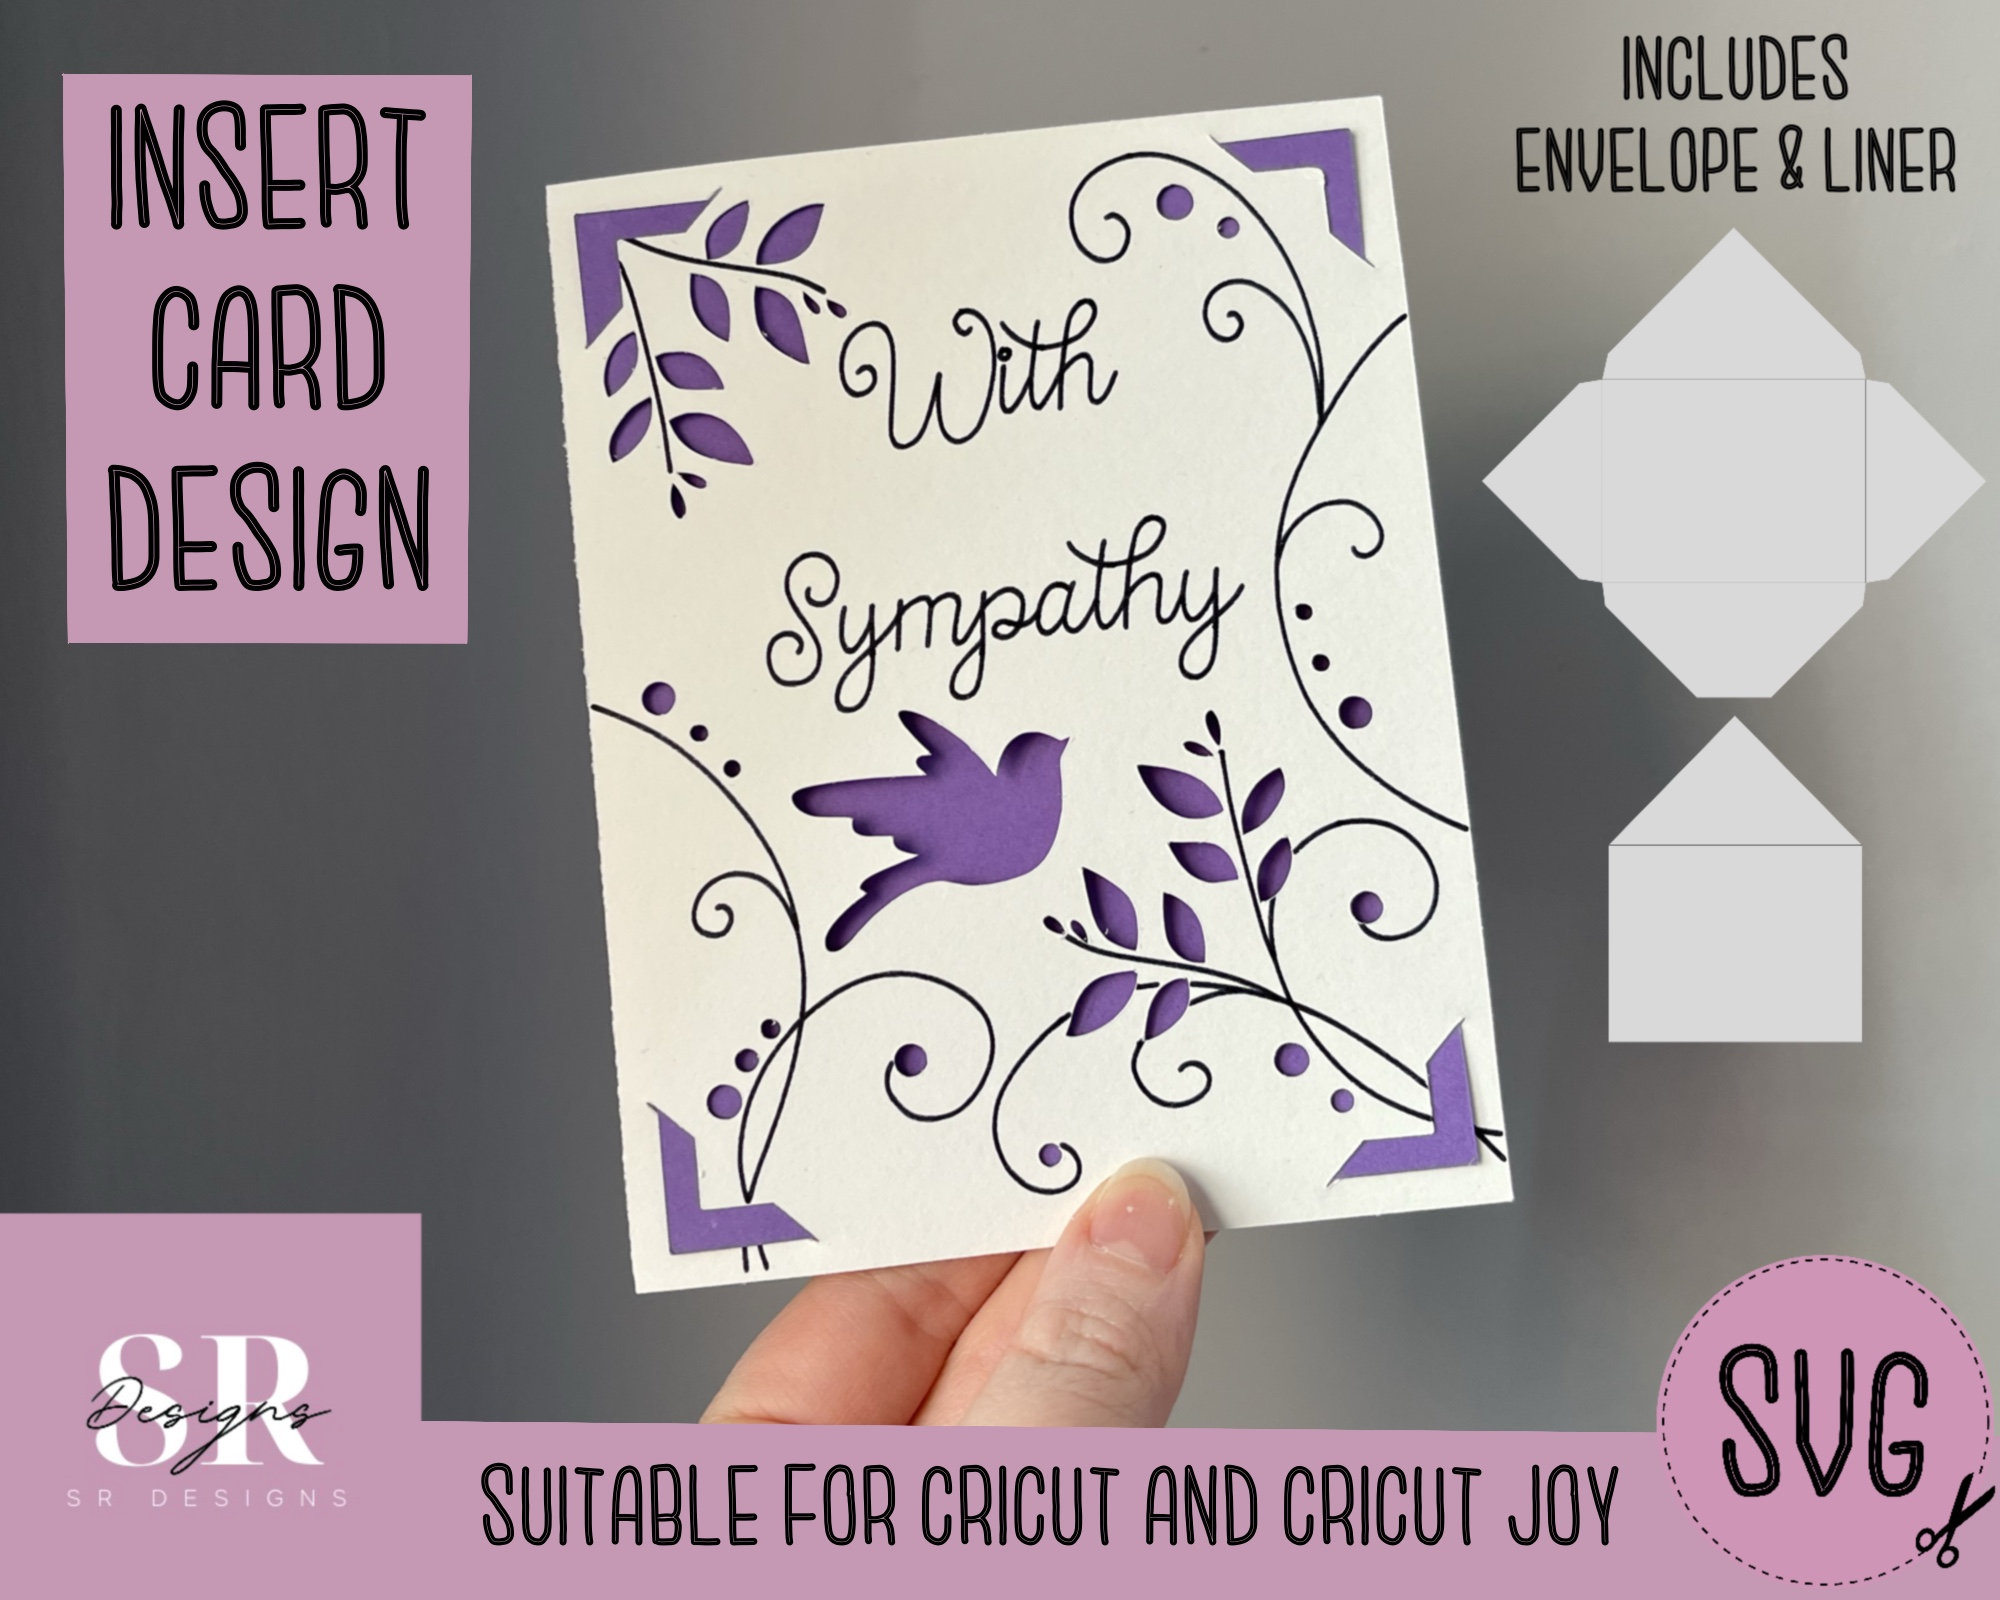 Envelope Template, Envelope svg, Printable envelope for 5*5 and 5*7 inches  insert cards - So Fontsy